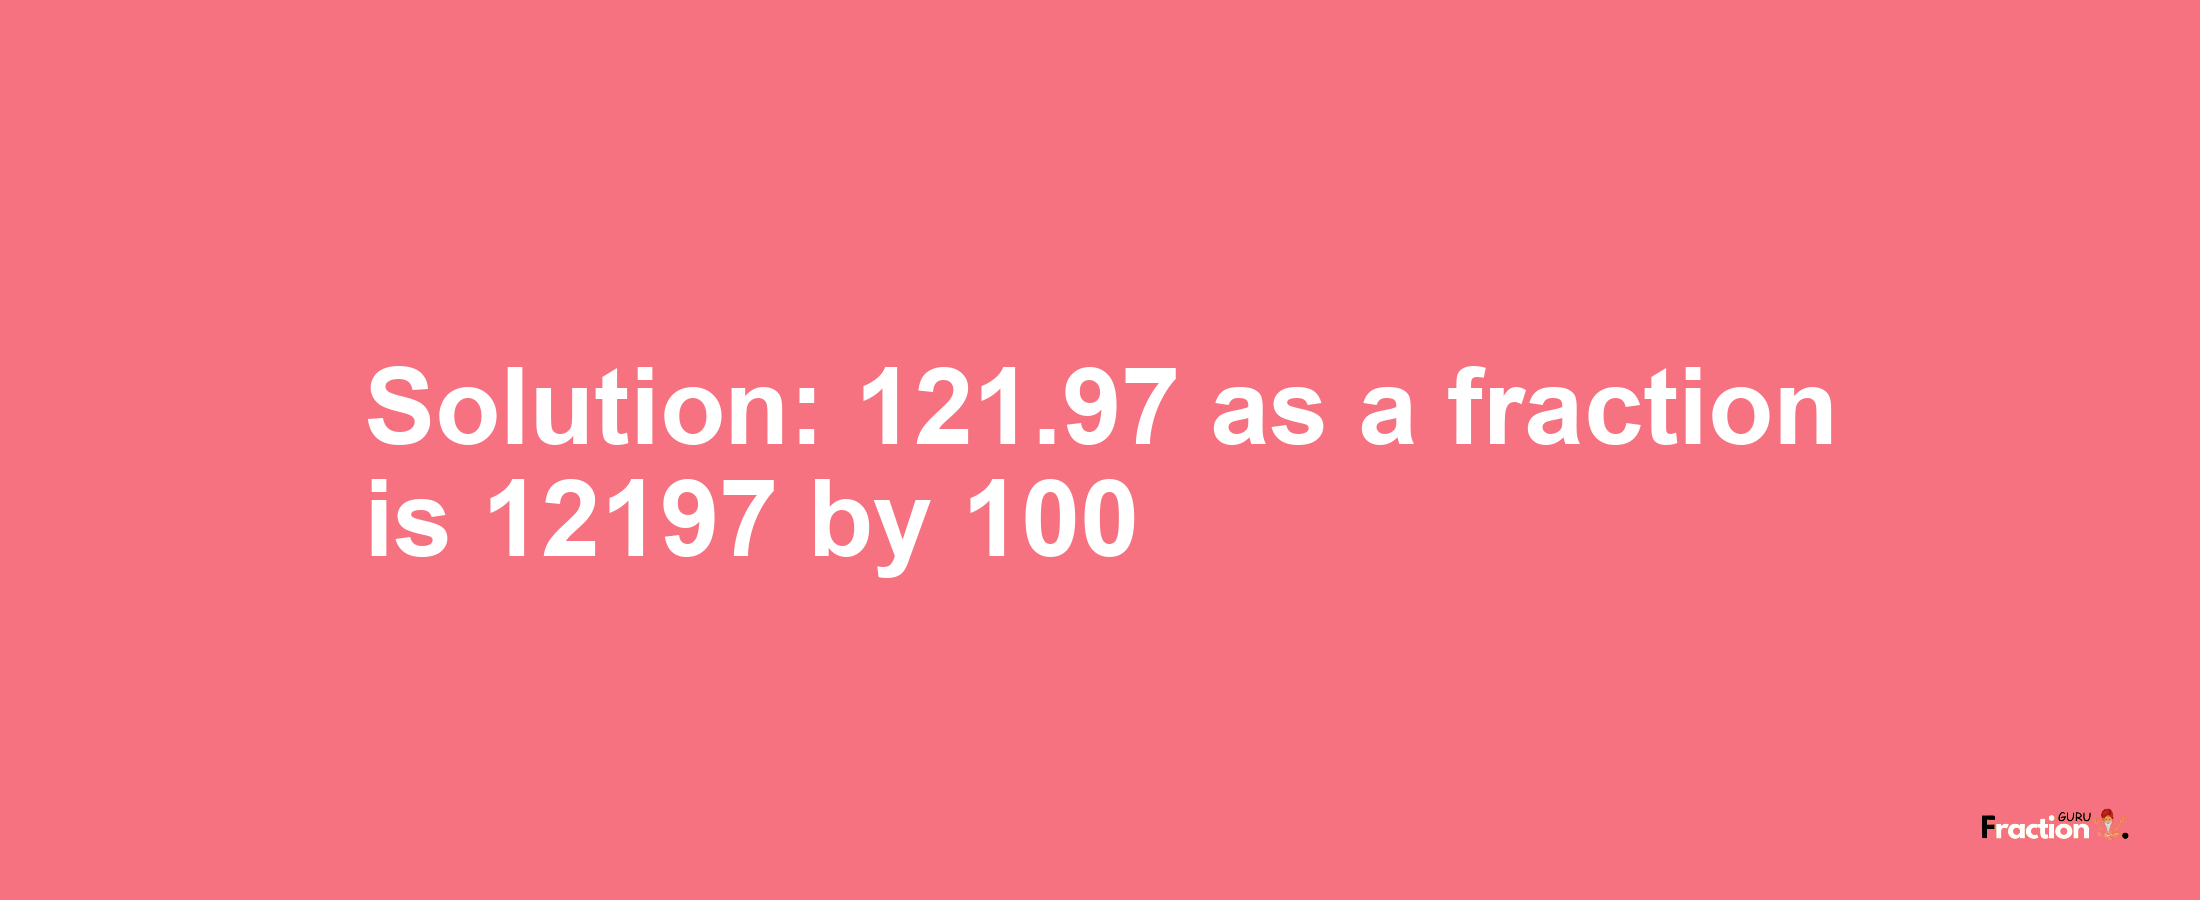 Solution:121.97 as a fraction is 12197/100